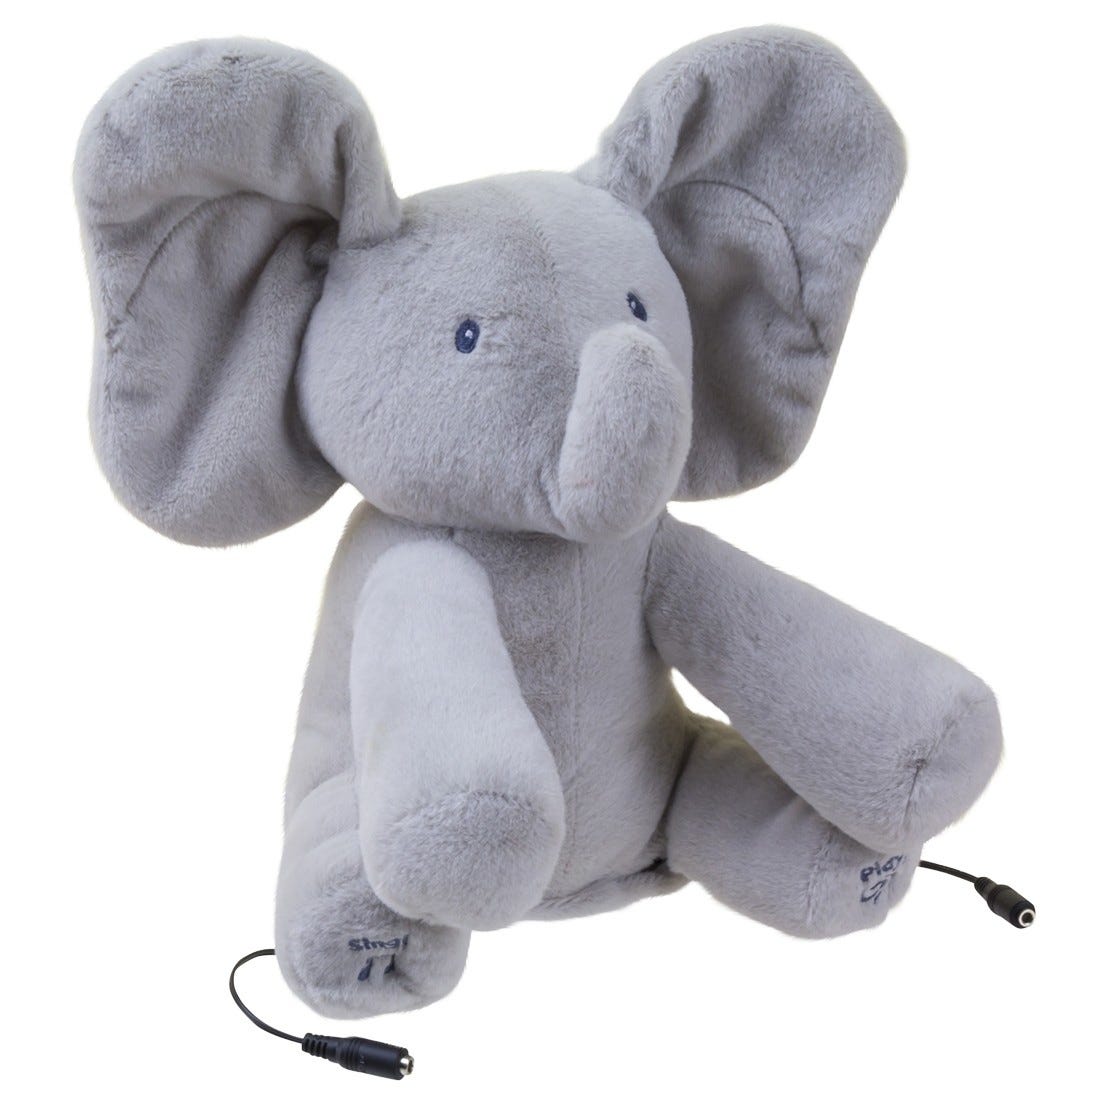 Flappy the Elephant Switch Adapted Toy